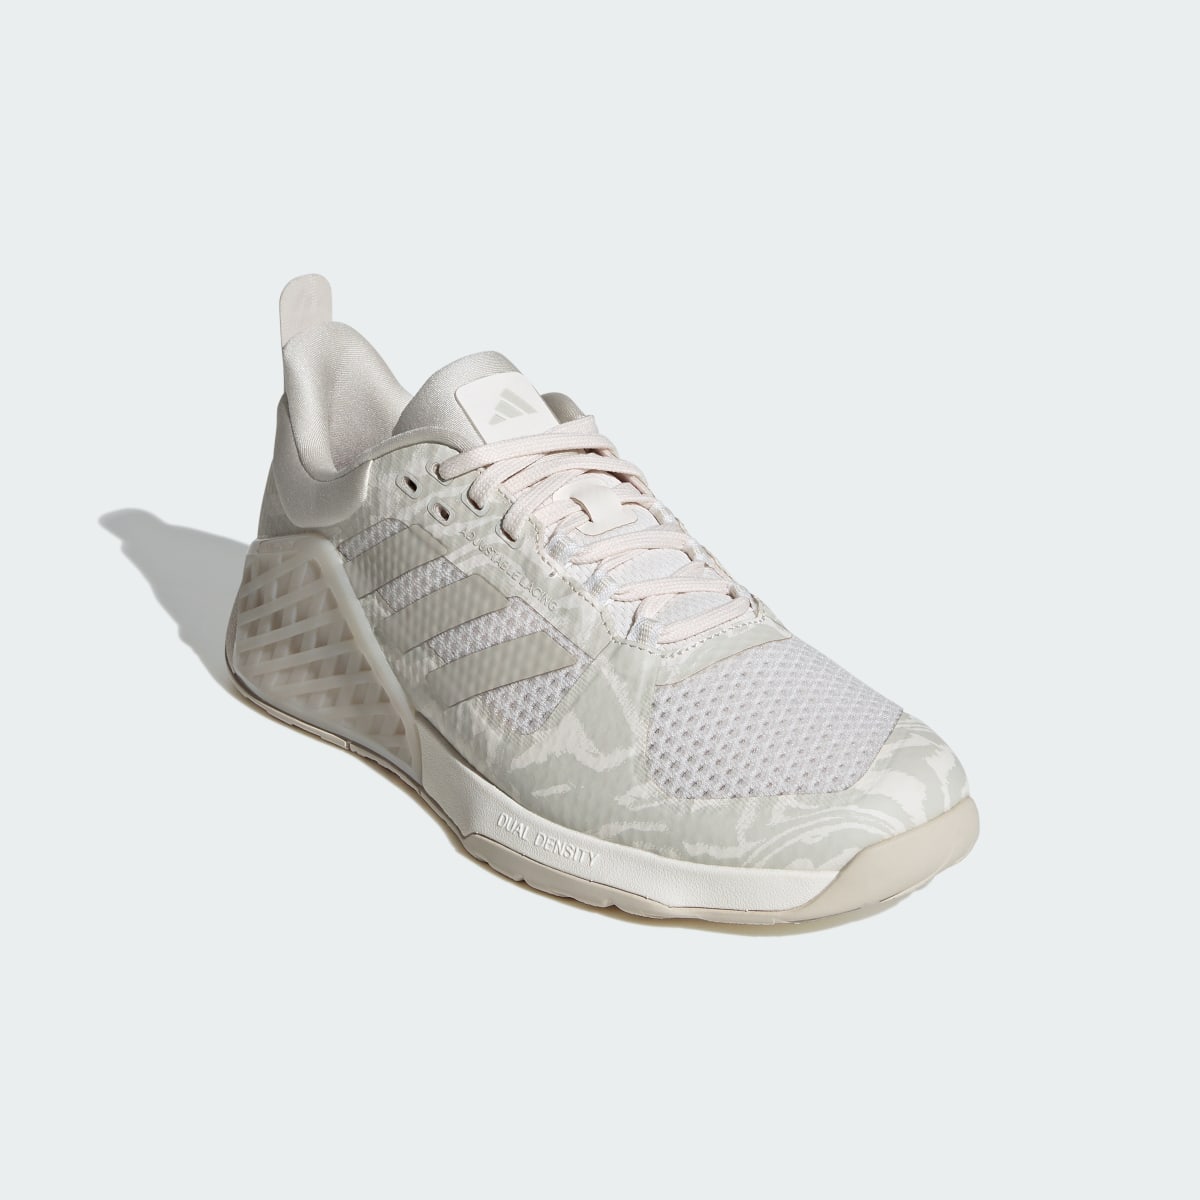 Adidas Dropset 2 Trainers. 8